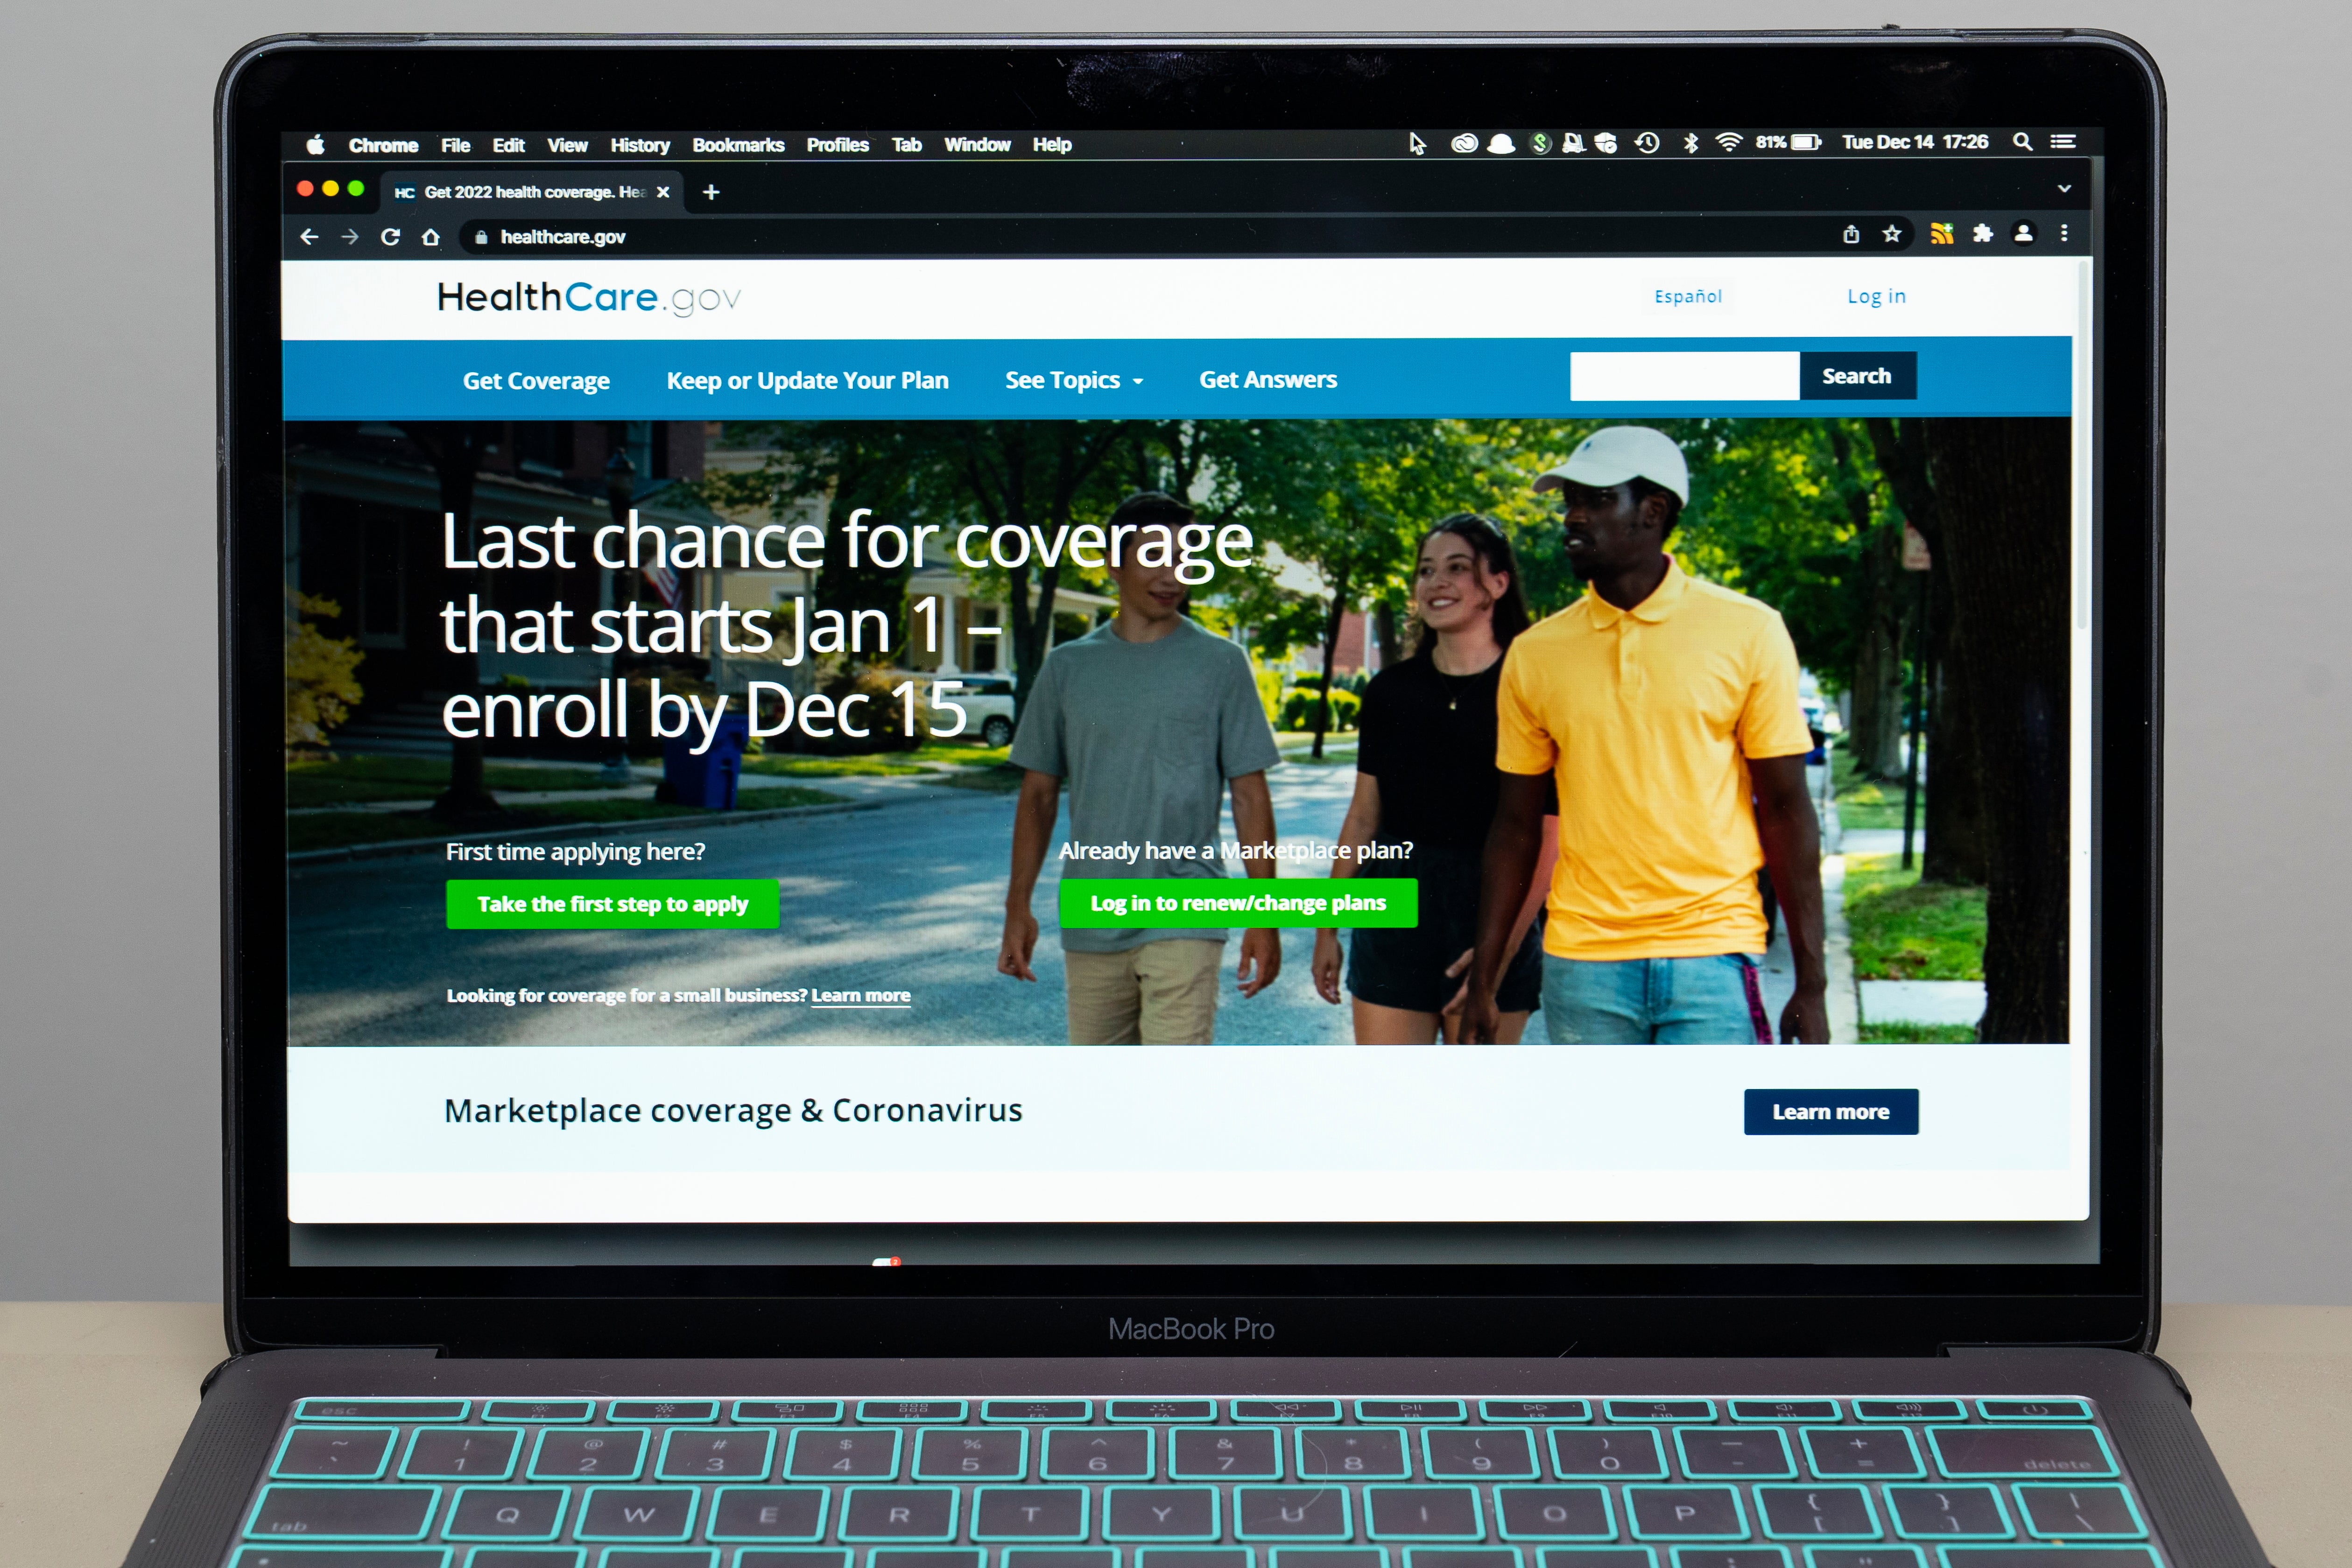 independent.co.uk - Kevin McGill - Compromise may mean continued reprieve for 'Obamacare' preventive care mandates